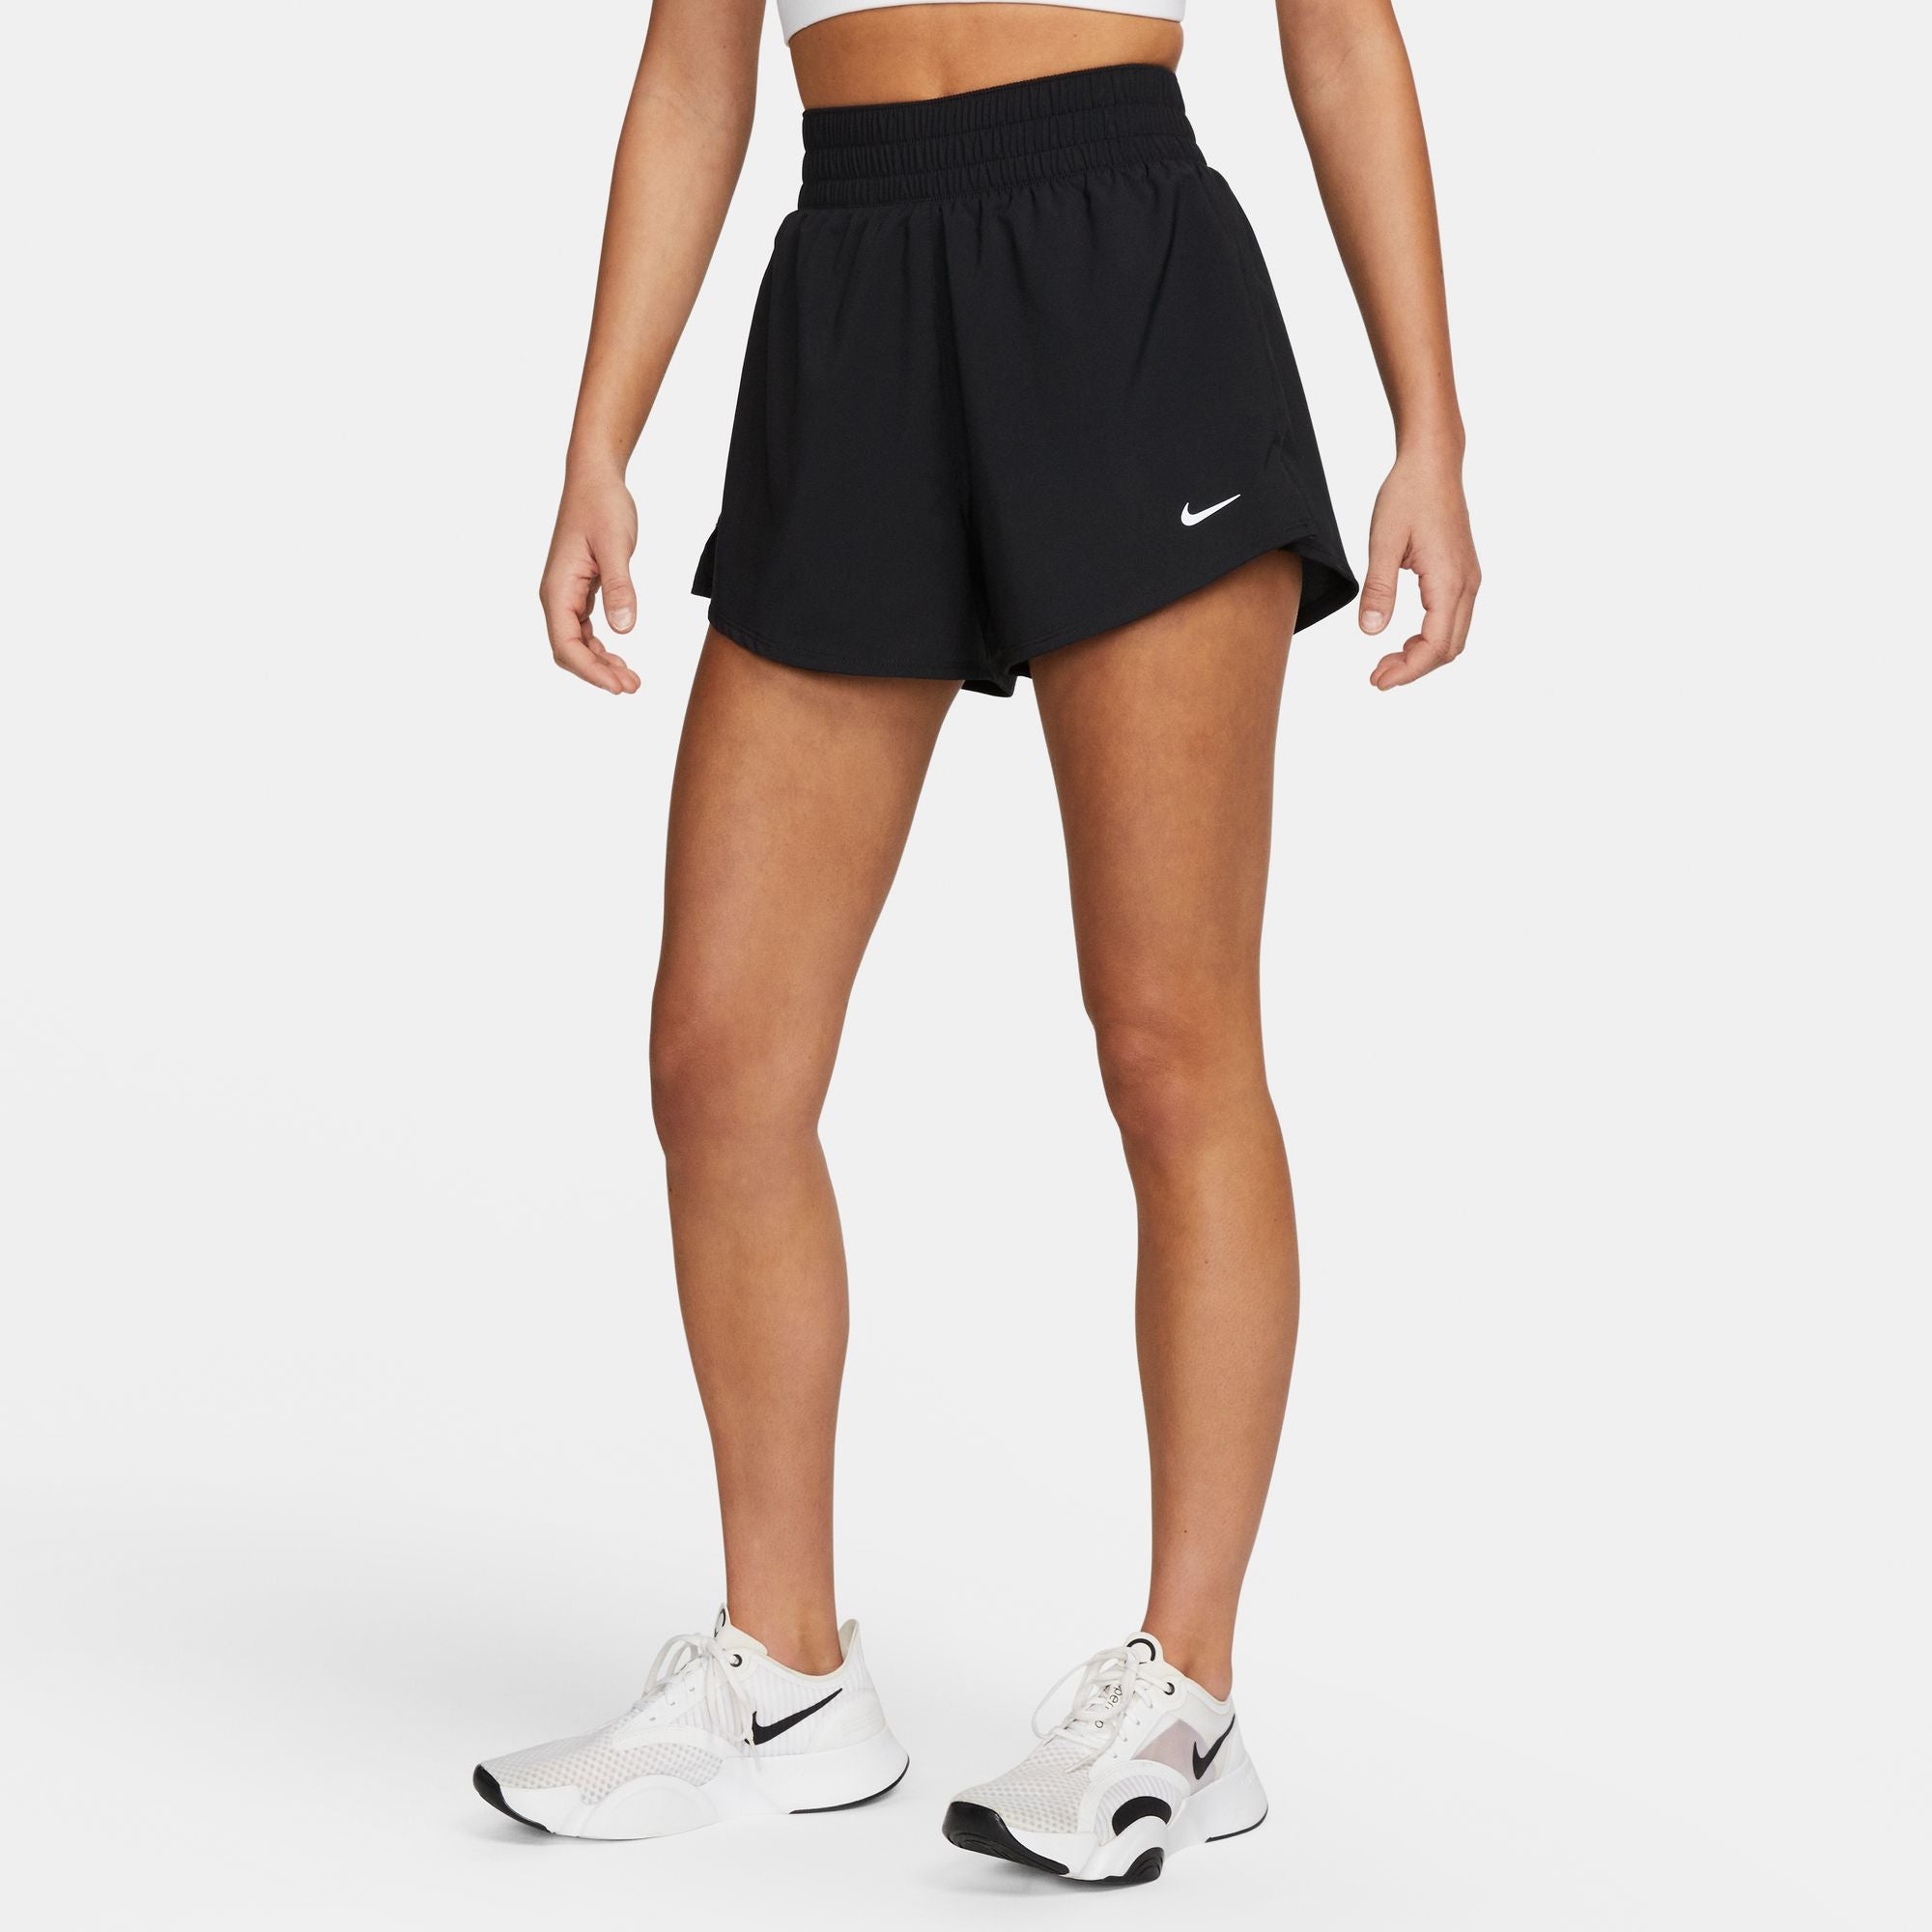 front view of womens 2N1 short